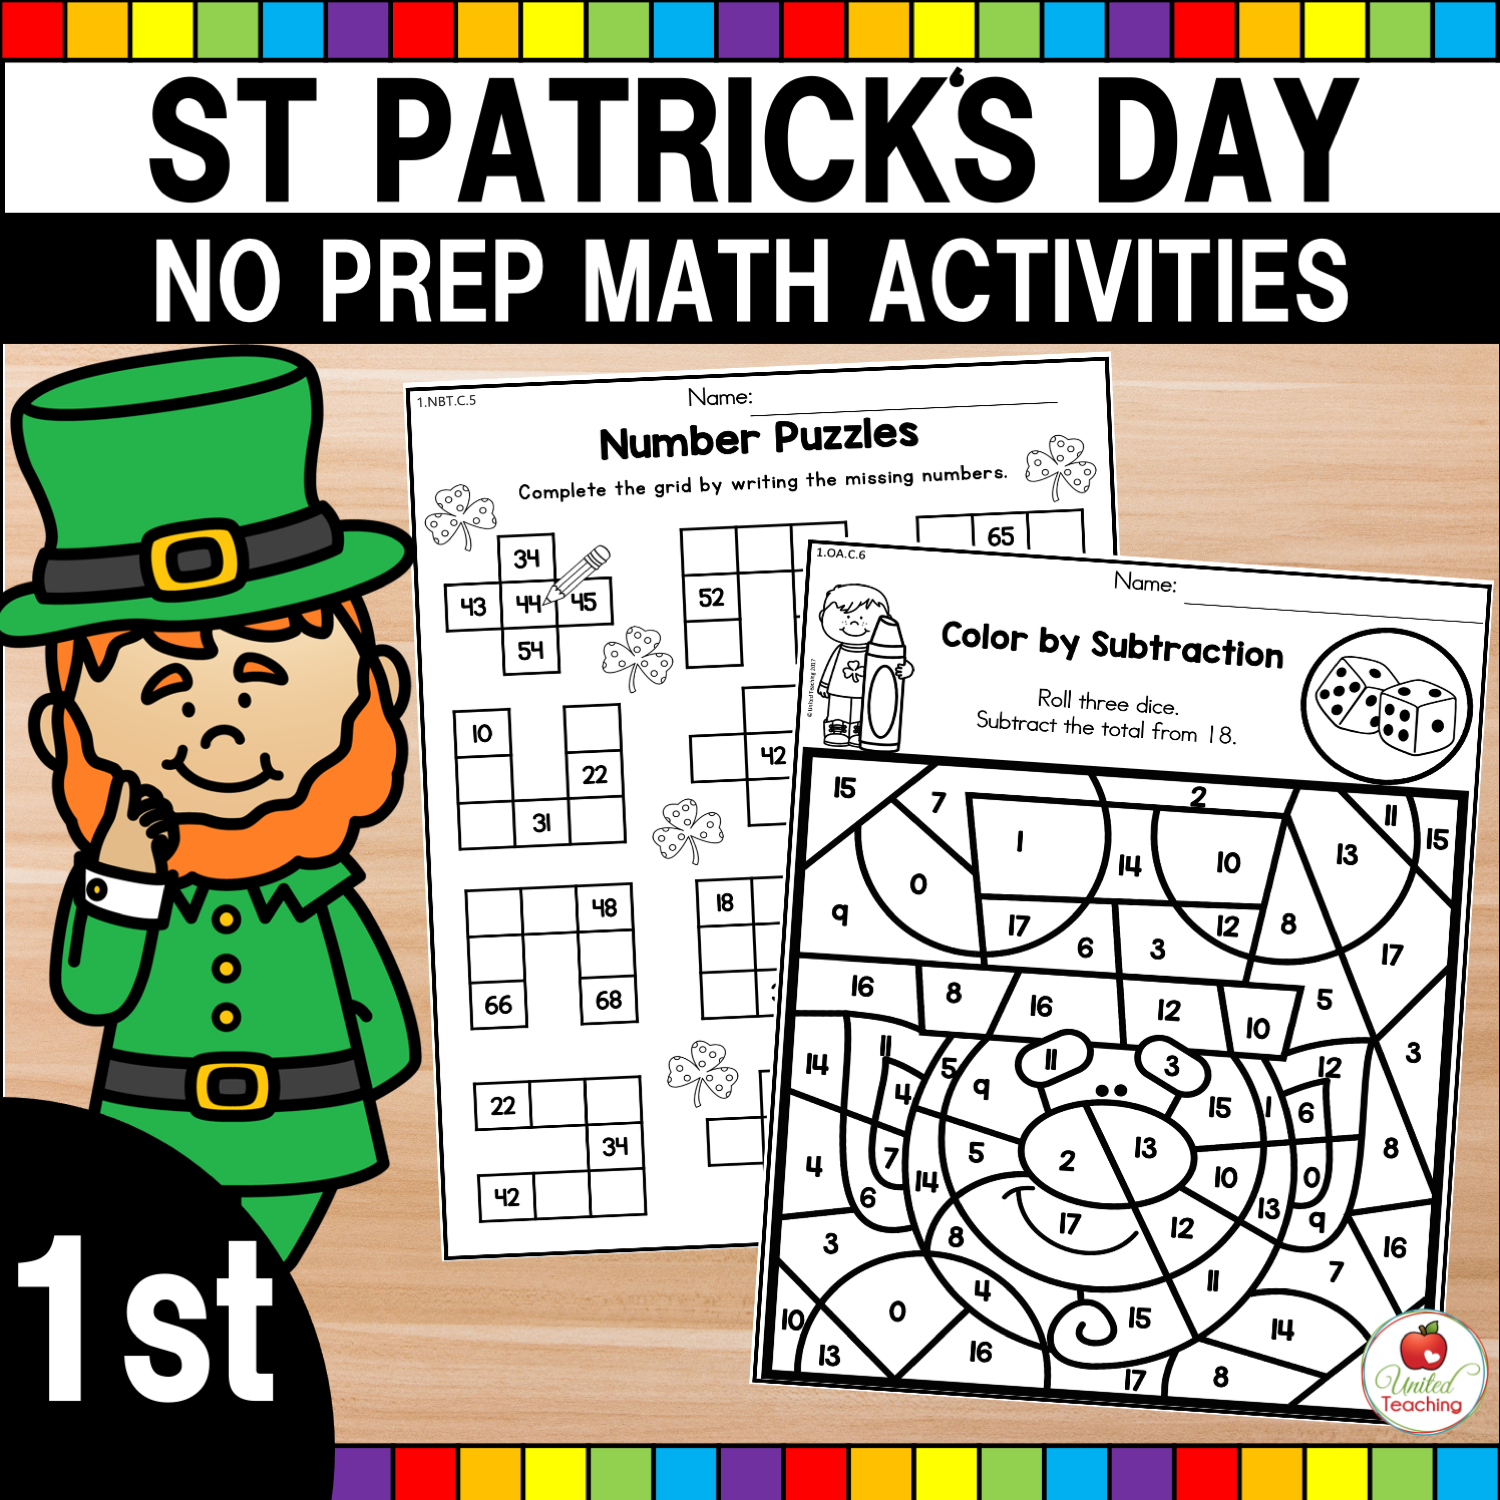 st-patrick-s-day-math-activities-for-1st-grade-united-teaching